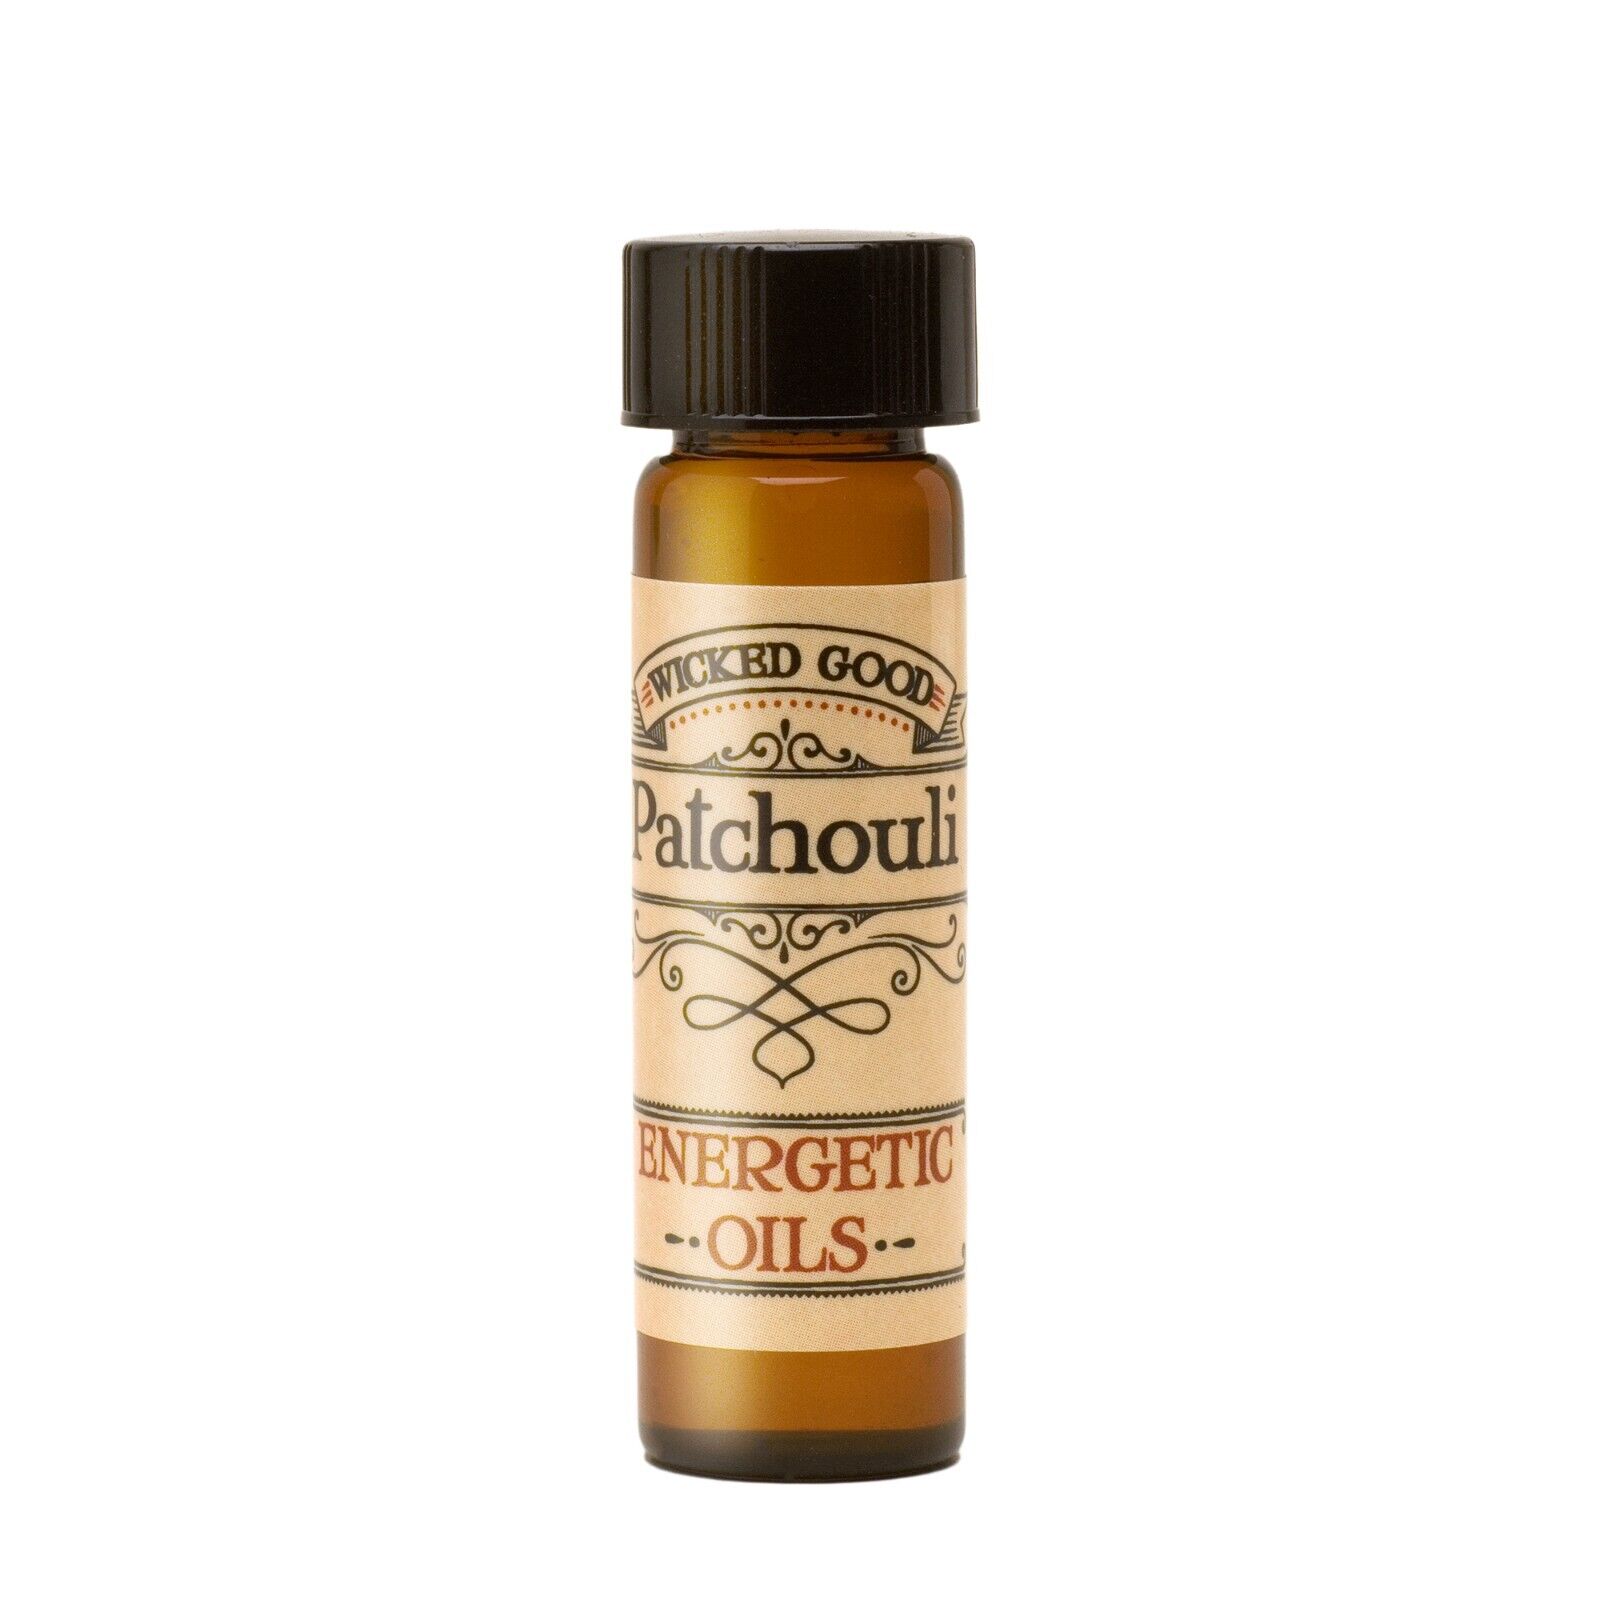 Patchouli Energetic Oil